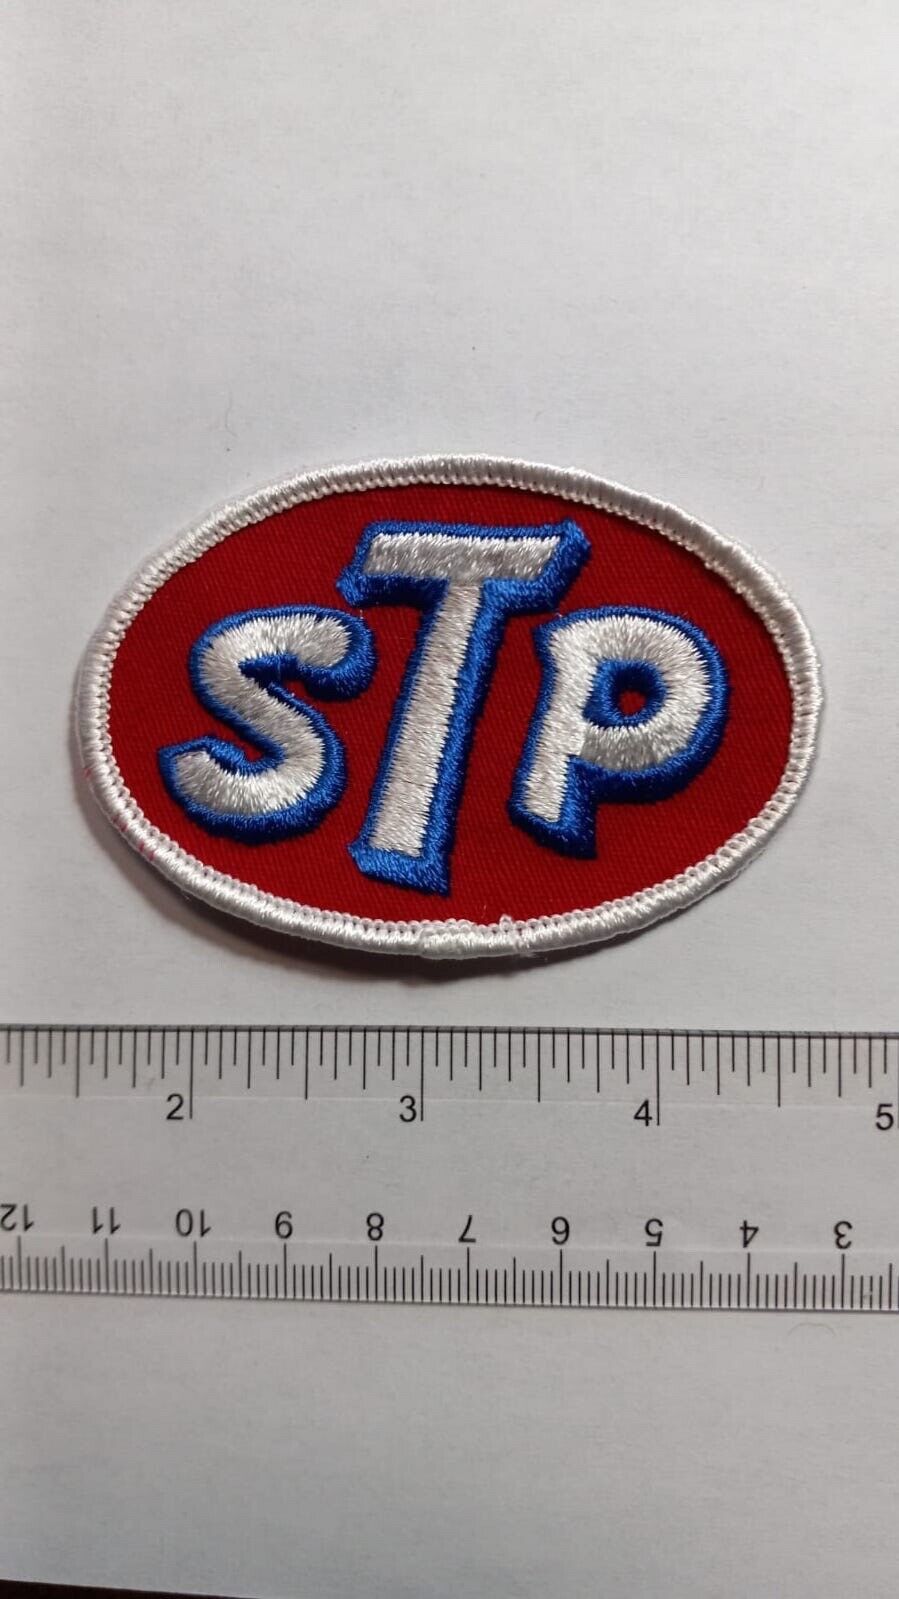 Vintage Sew-On STP Racing Patch  1970s